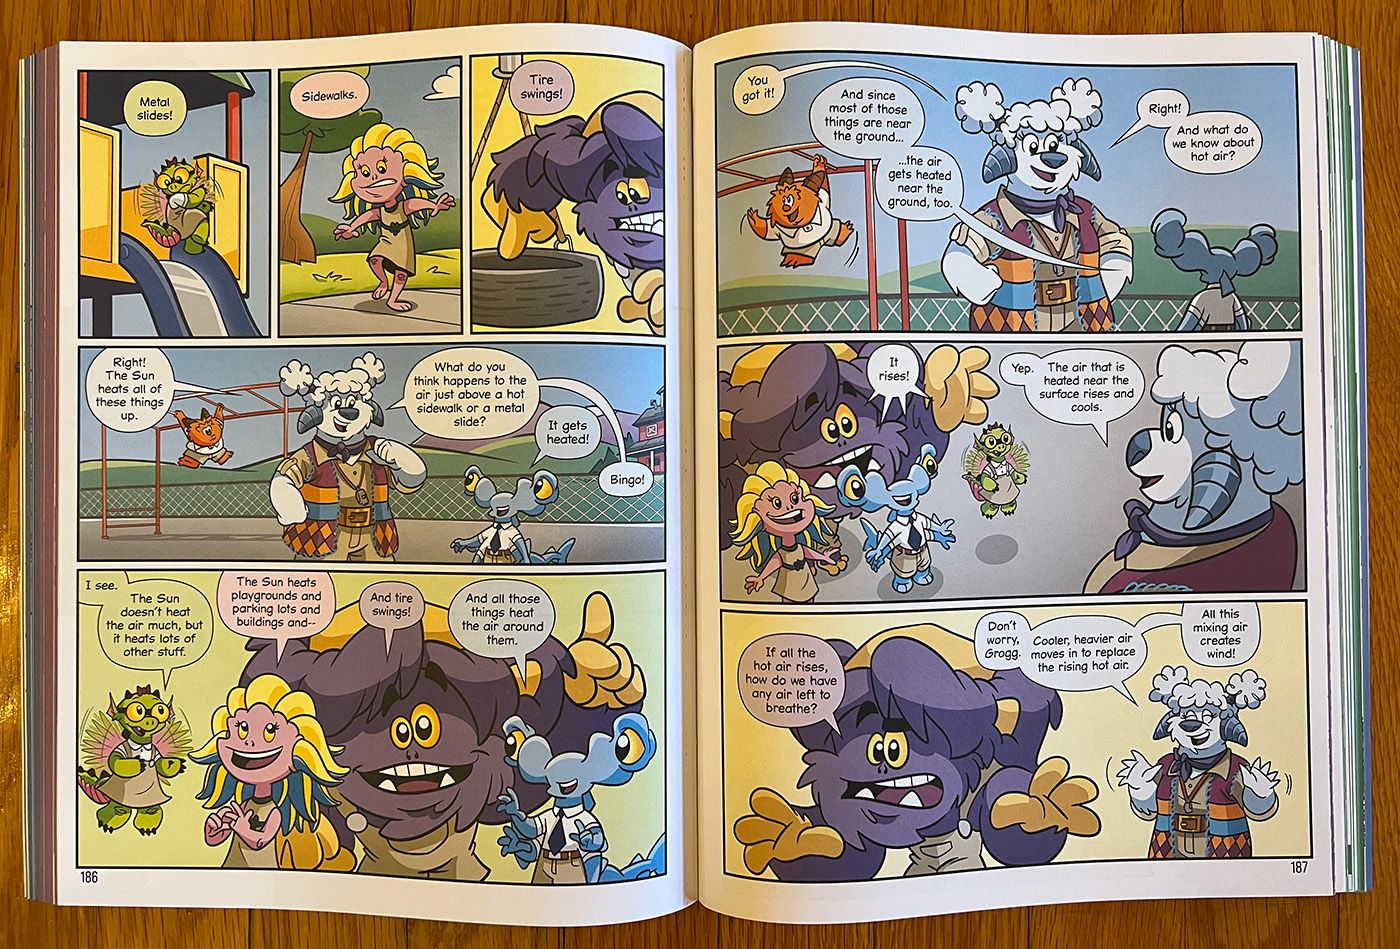 The little monsters of Beast Academy learn about the role heat plays in wind in one of the comic sections.